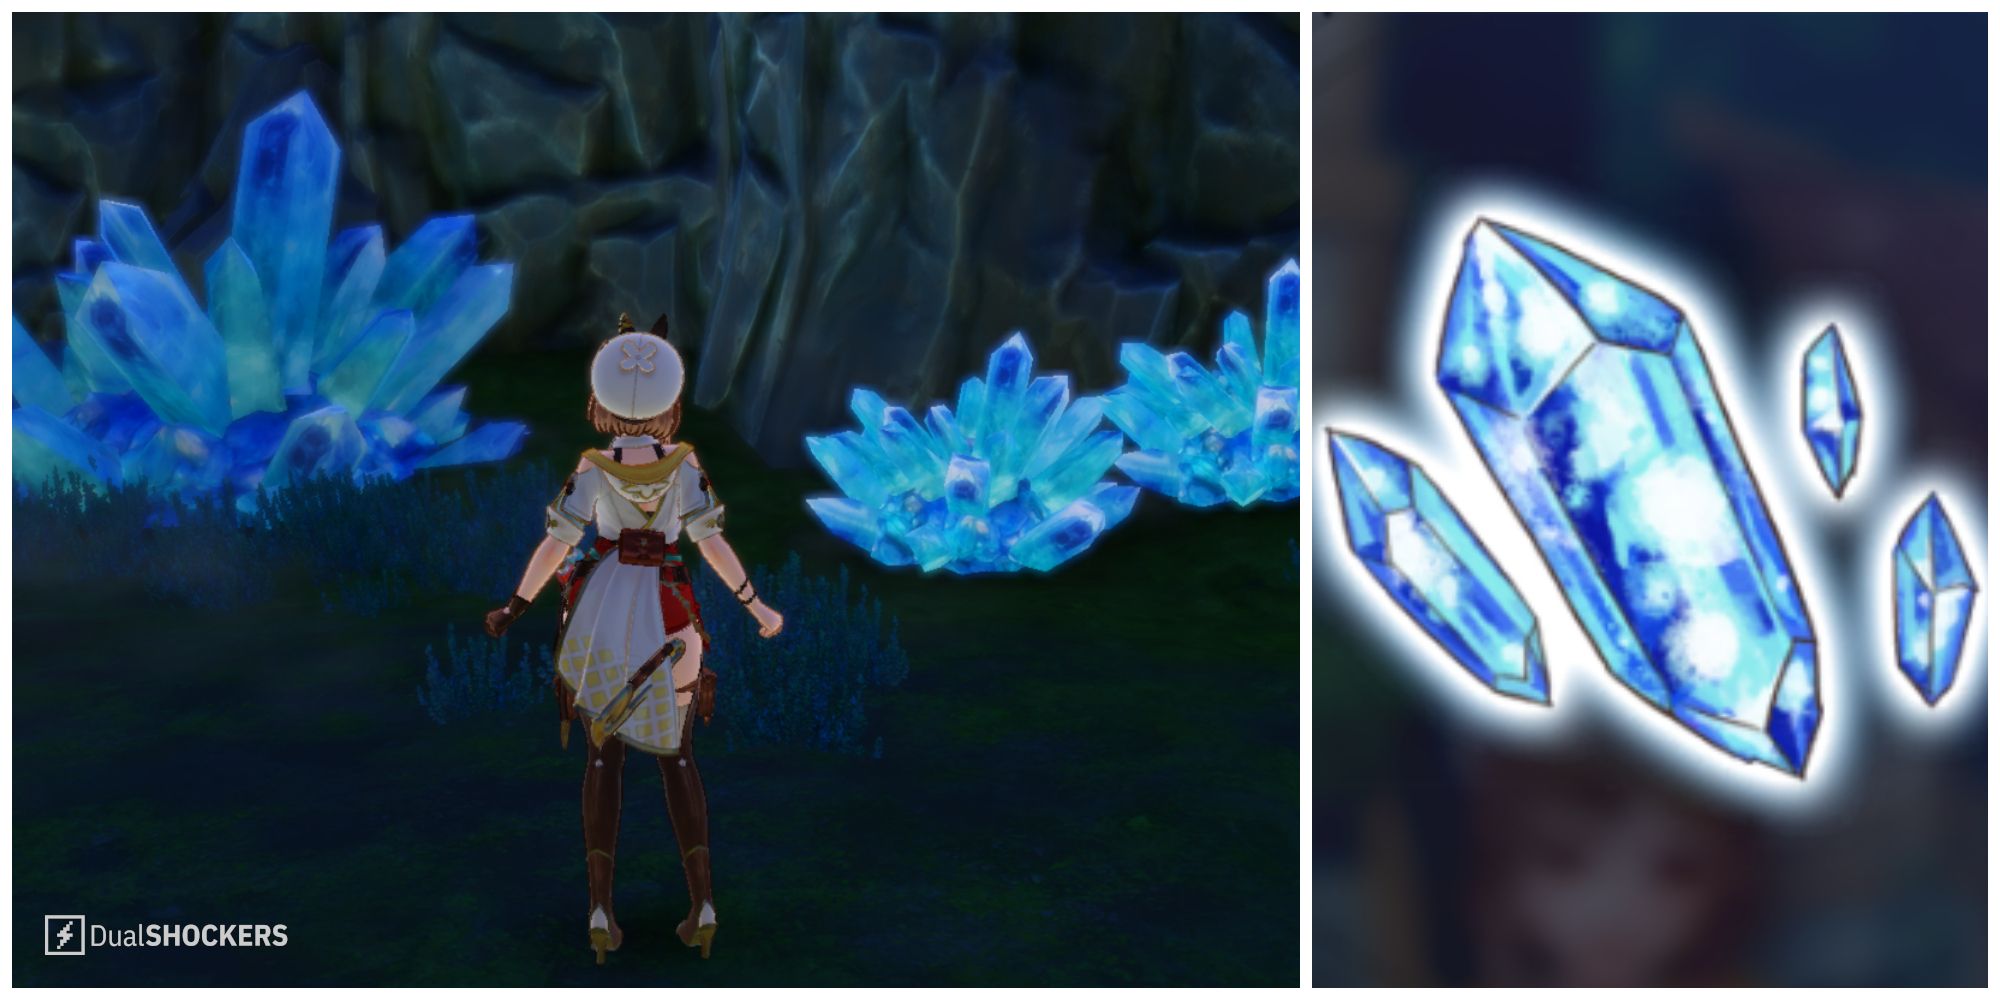 Split image of Fairystone Fragment in the wild and the main image of the item in the basket in Atelier Ryza 3.